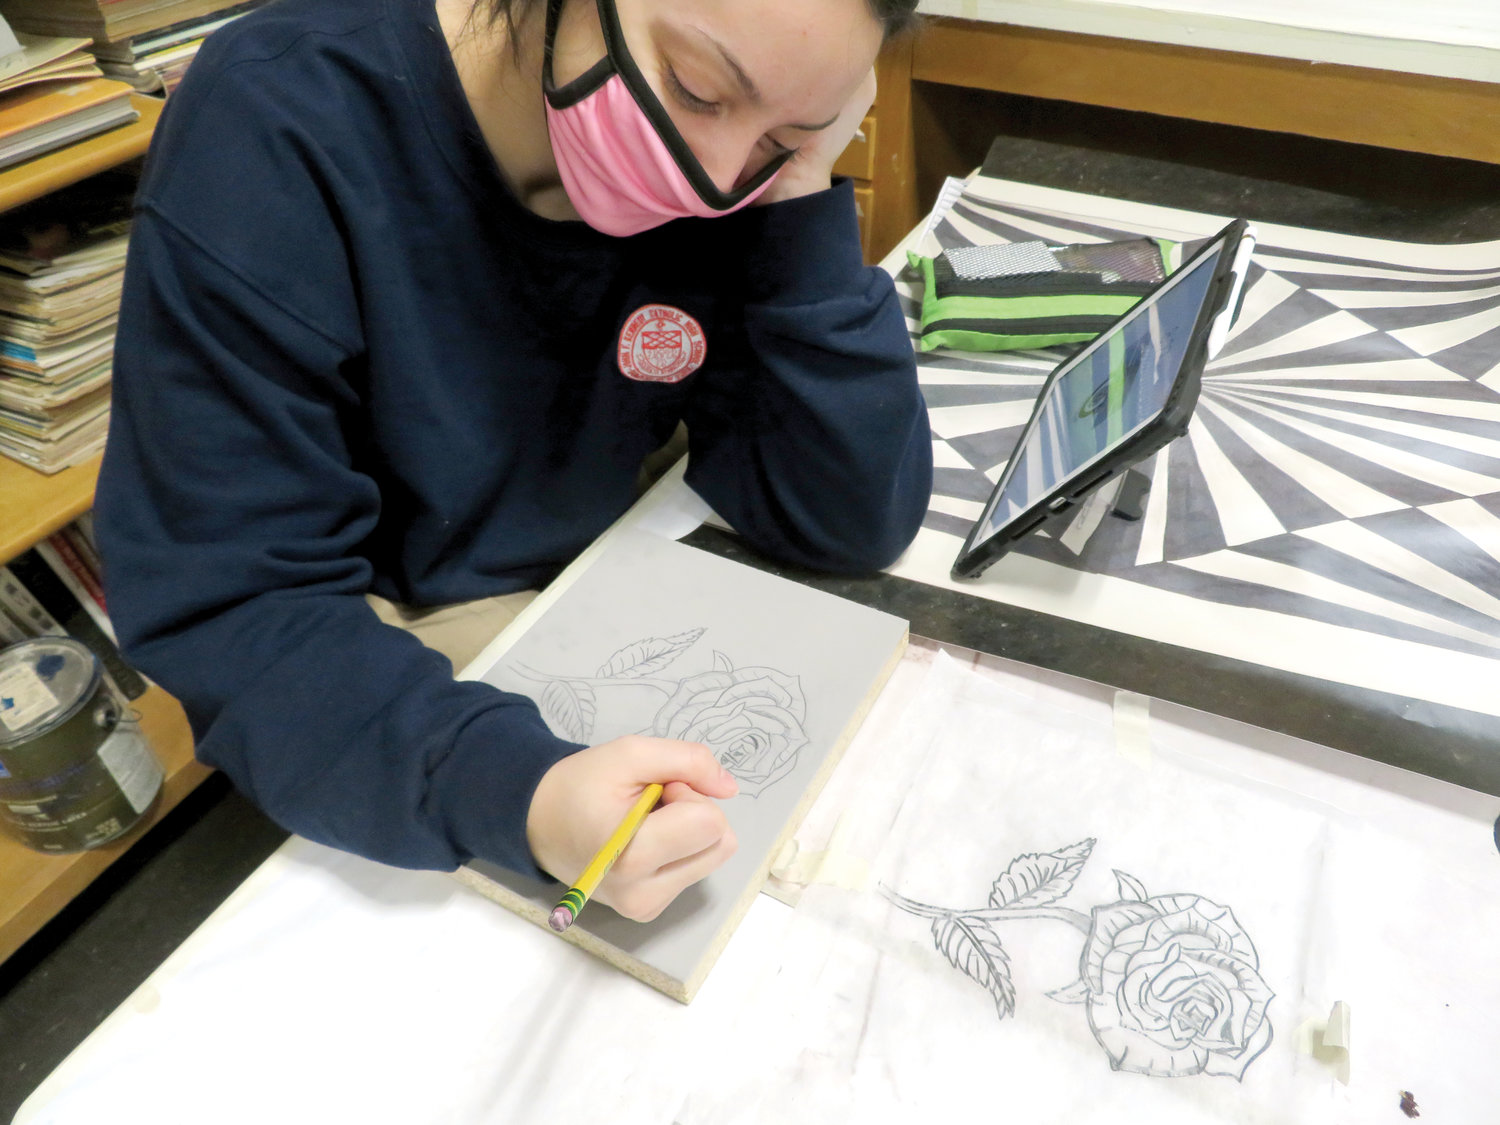 Students at John F. Kennedy Catholic Preparatory School in Somers are divided into two cohort groups that alternate weeks of in-person study with virtual instruction at home. Junior Valeria Acierno works on a drawing in studio art.